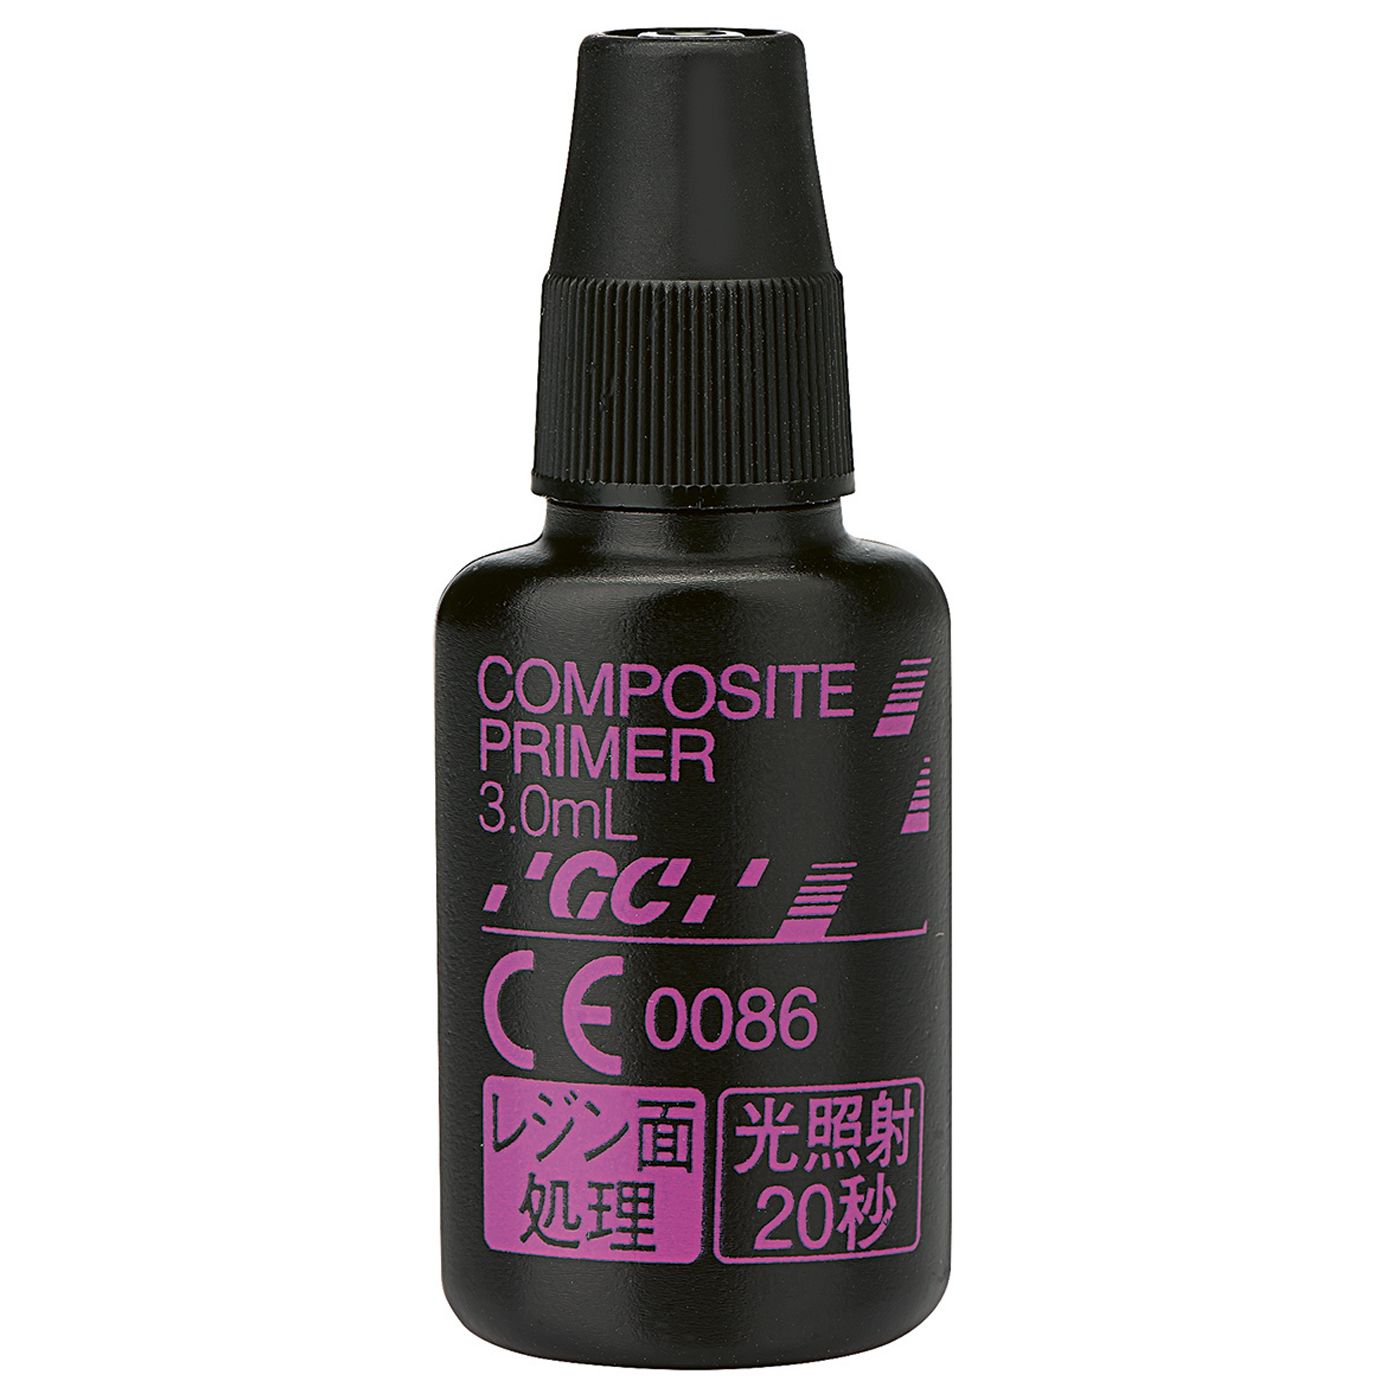 Read more about the article Composite Primer GC